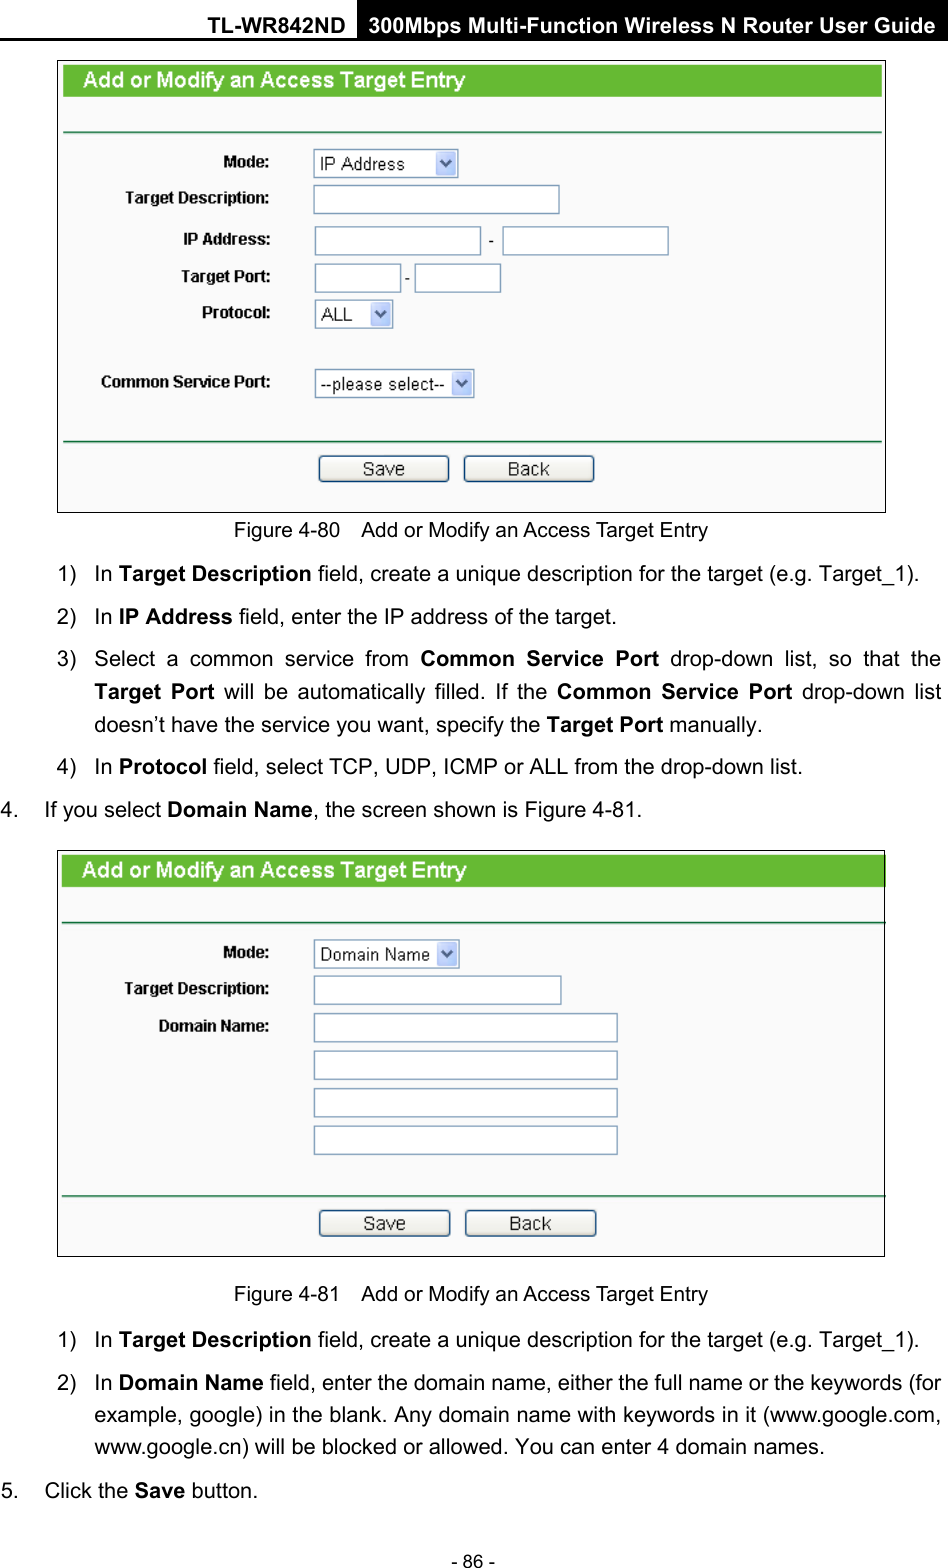 TL-WR842ND 300Mbps Multi-Function Wireless N Router User Guide  - 86 -  Figure 4-80  Add or Modify an Access Target Entry 1) In Target Description field, create a unique description for the target (e.g. Target_1). 2)  In IP Address field, enter the IP address of the target. 3) Select a common service from Common Service Port drop-down list, so that the Target Port will be automatically filled. If the Common Service Port drop-down  list doesn’t have the service you want, specify the Target Port manually. 4)  In Protocol field, select TCP, UDP, ICMP or ALL from the drop-down list.  4. If you select Domain Name, the screen shown is Figure 4-81.  Figure 4-81  Add or Modify an Access Target Entry 1) In Target Description field, create a unique description for the target (e.g. Target_1). 2)  In Domain Name field, enter the domain name, either the full name or the keywords (for example, google) in the blank. Any domain name with keywords in it (www.google.com, www.google.cn) will be blocked or allowed. You can enter 4 domain names. 5. Click the Save button. 